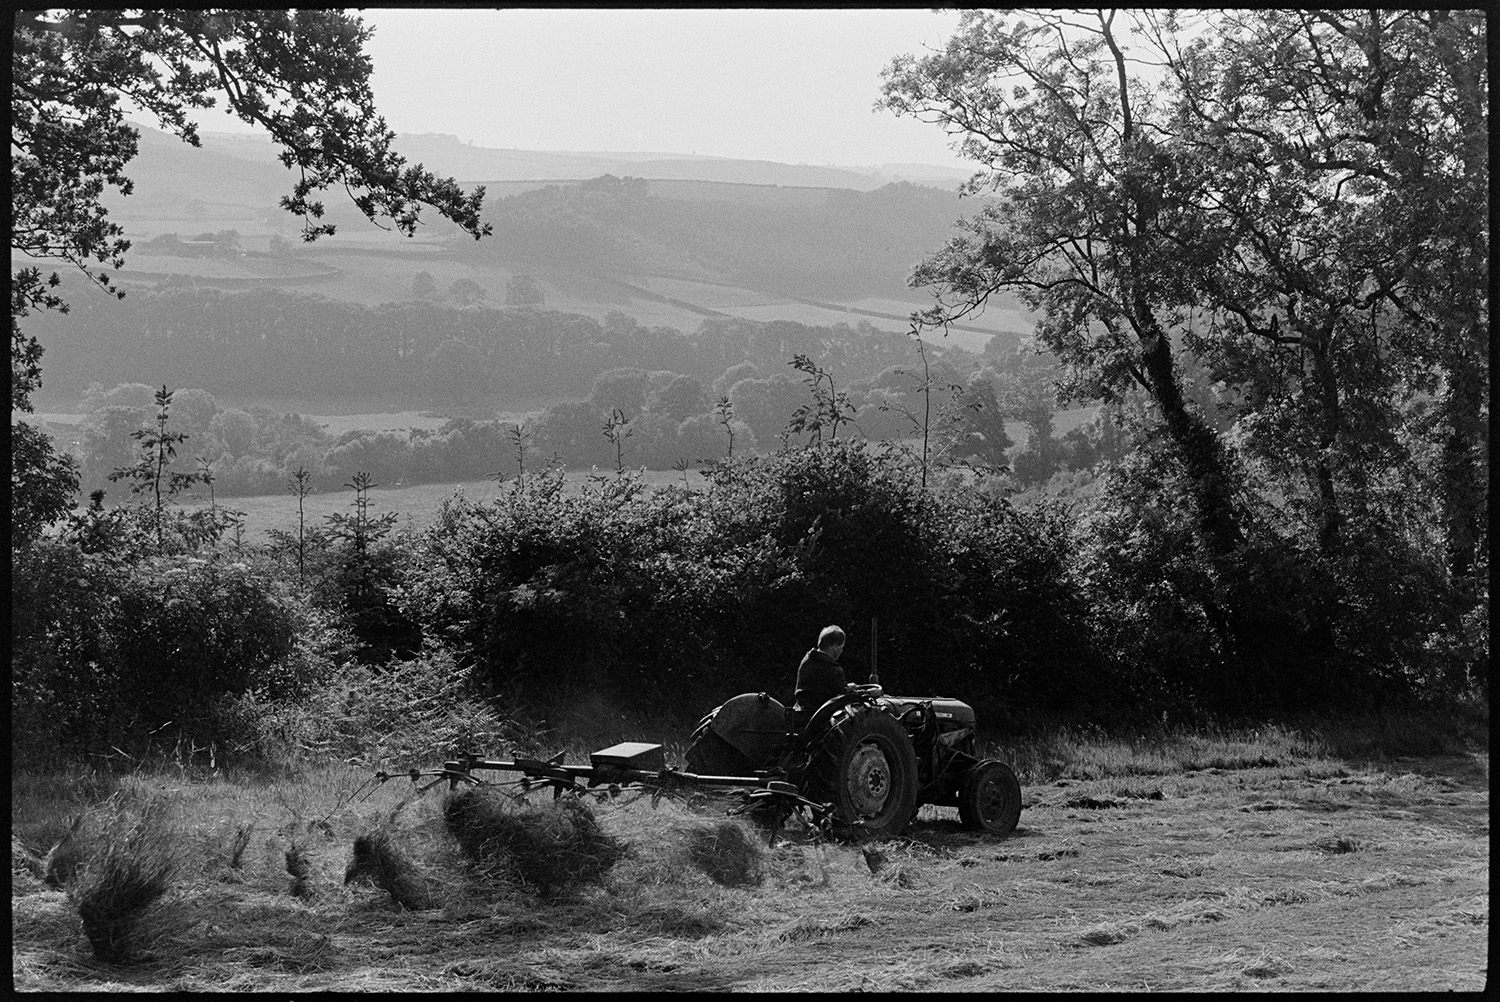 Farmer whisking grass. 
[Alan Berry turning grass with a tractor and whisk in a field at Ashwell, Dolton. A landscape of fields and trees can be seen in the background.]